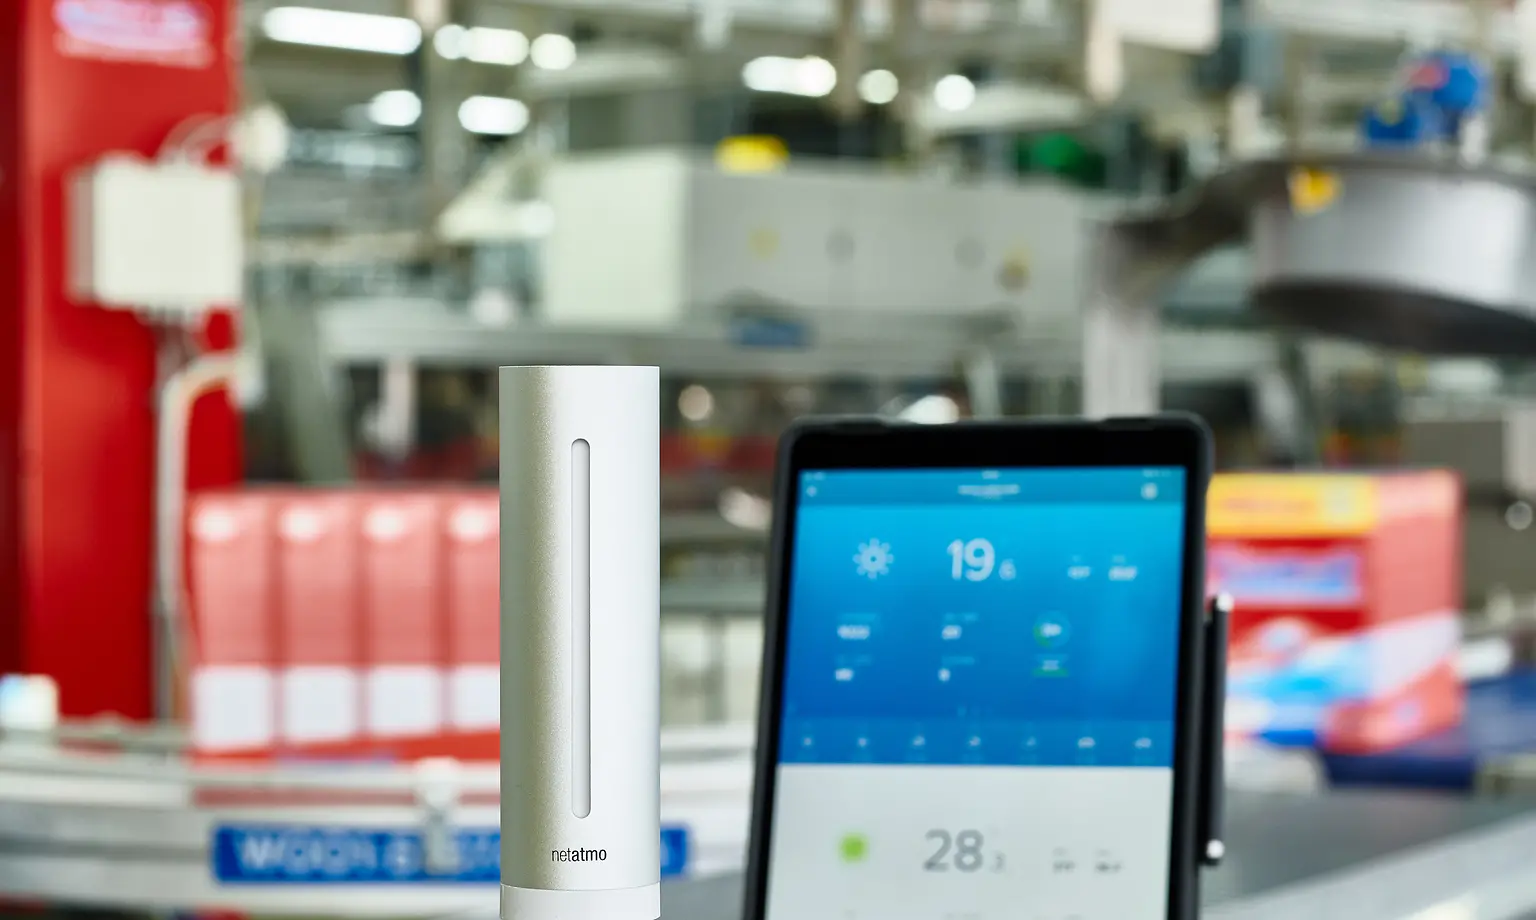 Henkel implements Netatmo’s smart home technology in its manufacturing plants.